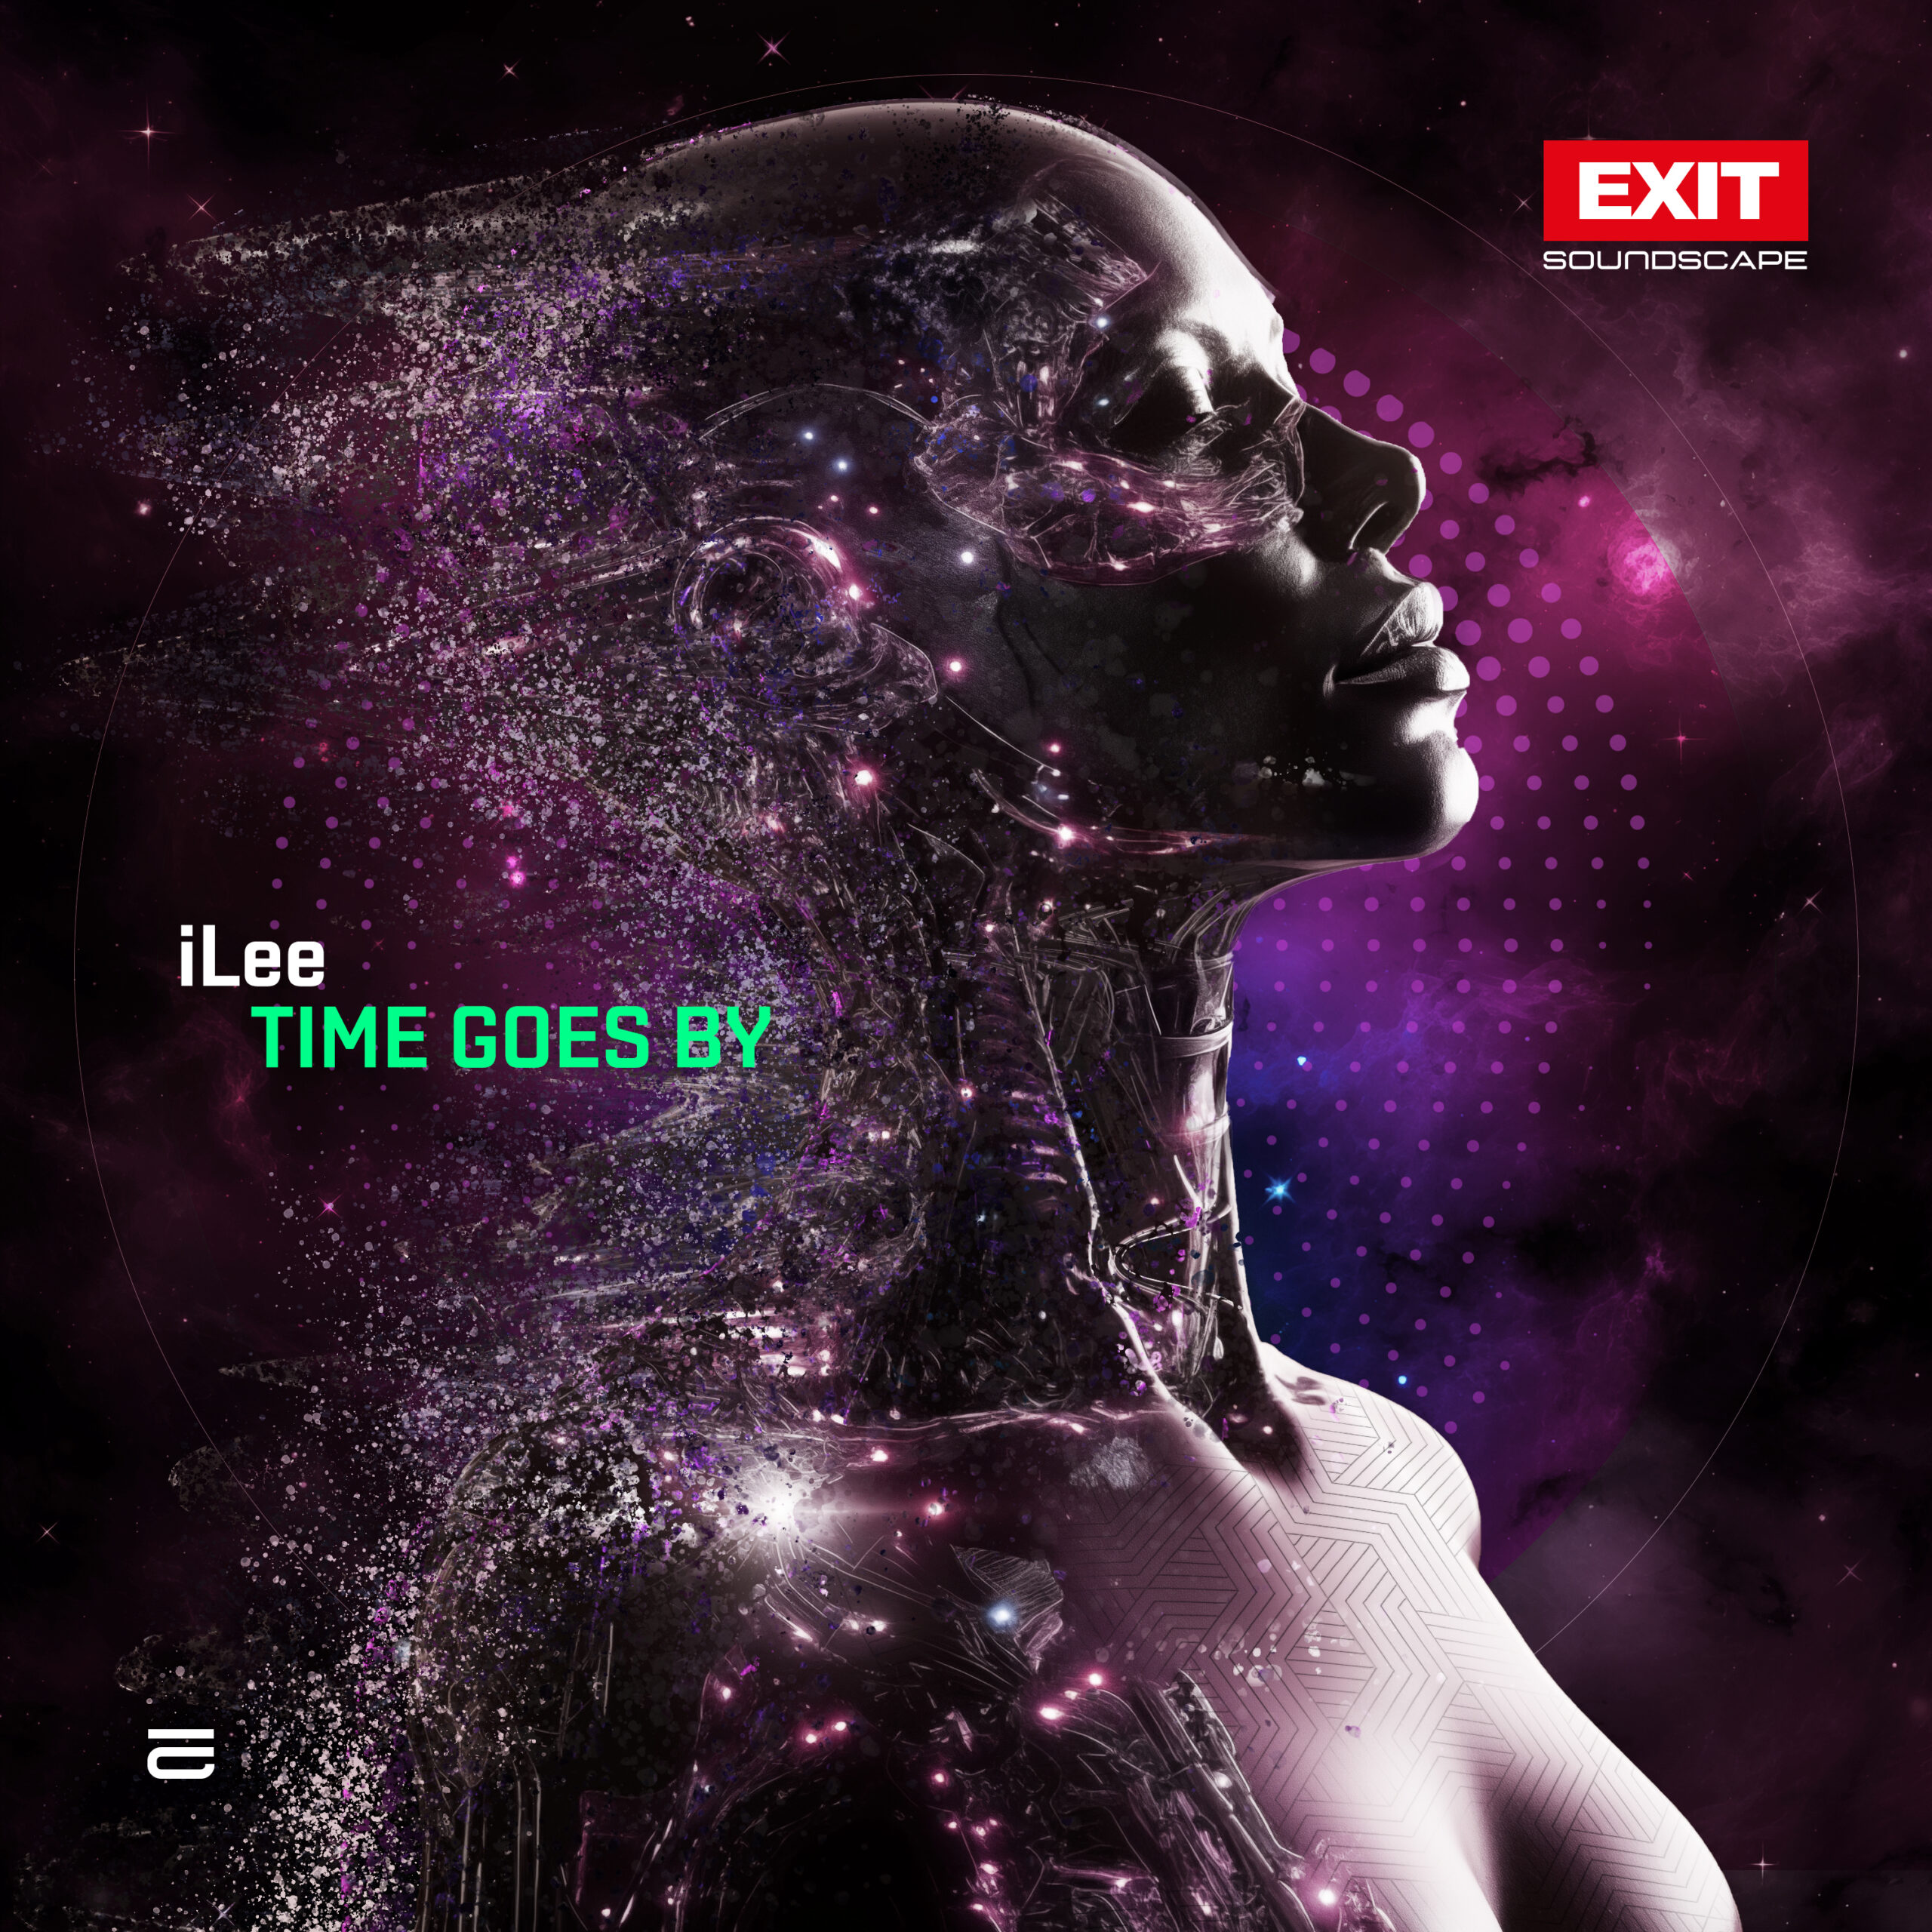 iLEE debuts on EXIT Soundscape with new single ‘Time Goes By’